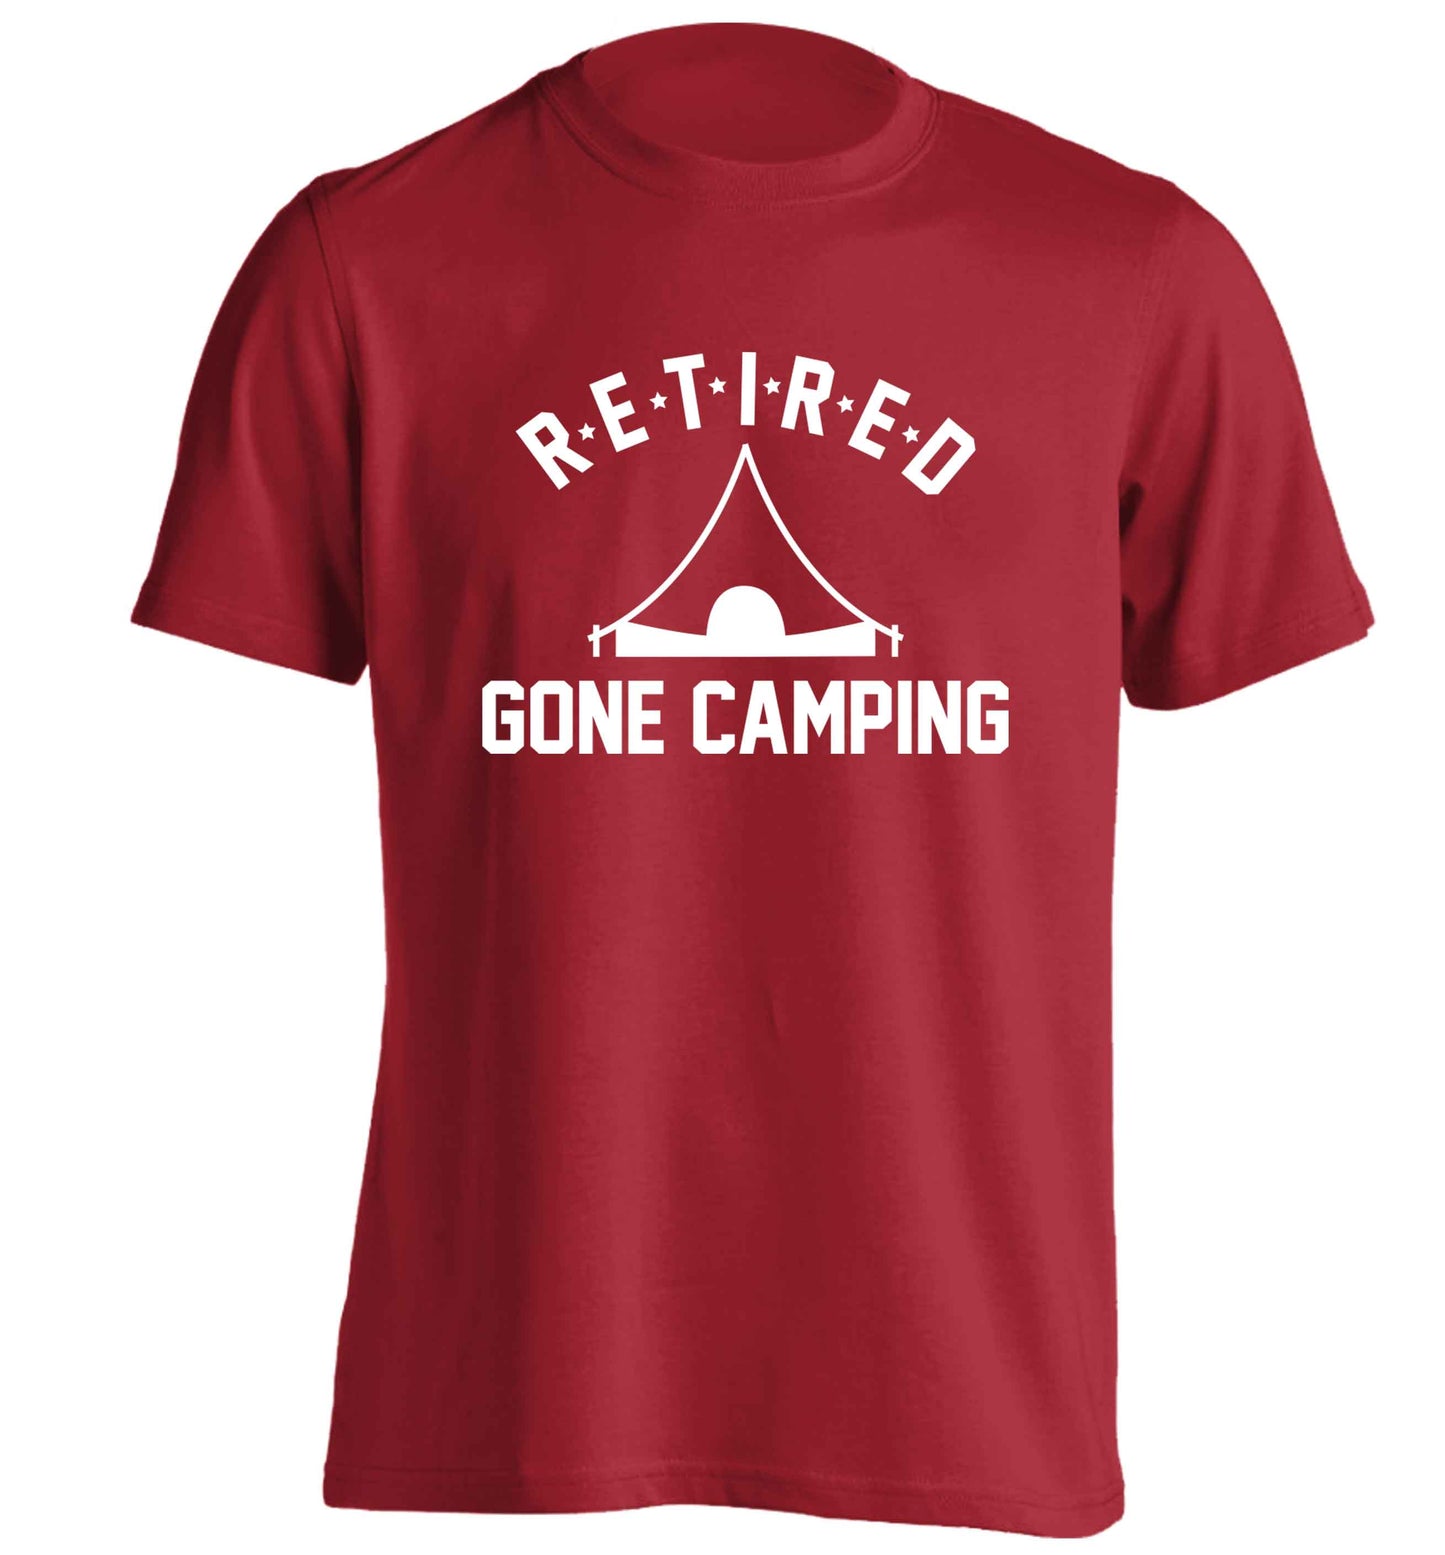 Retired gone camping adults unisex red Tshirt 2XL